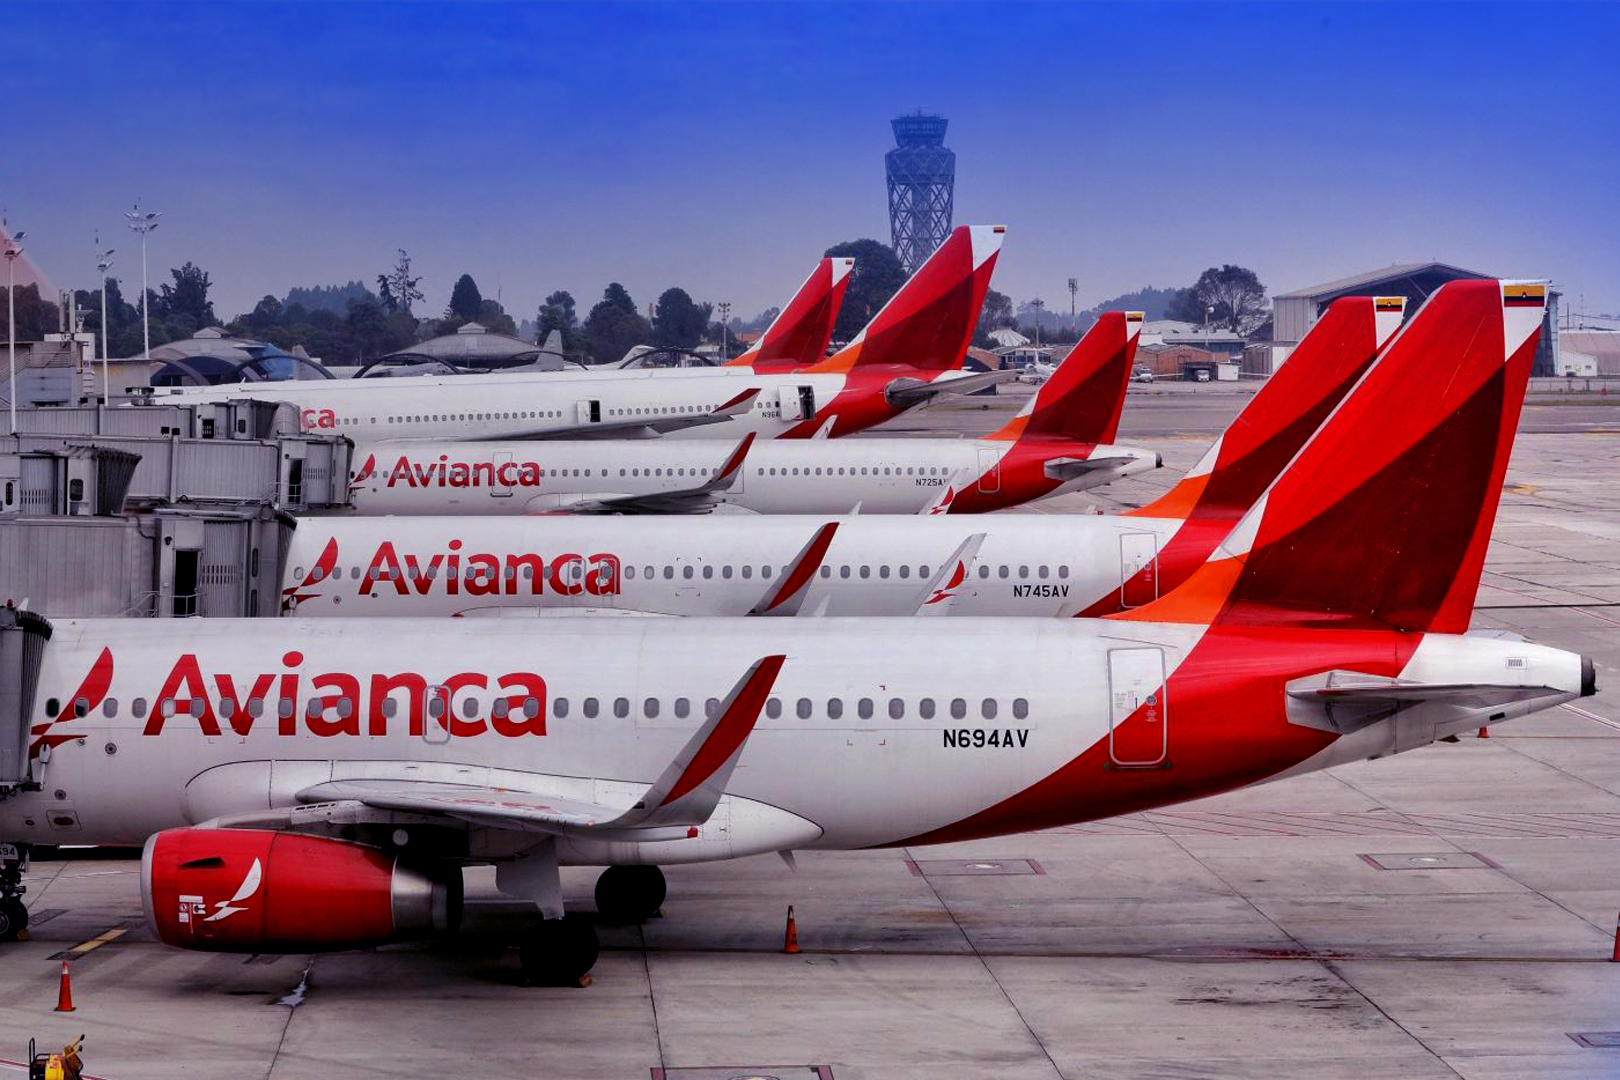 Avianca, the second oldest airline, driven to bankruptcy amid COVID-19